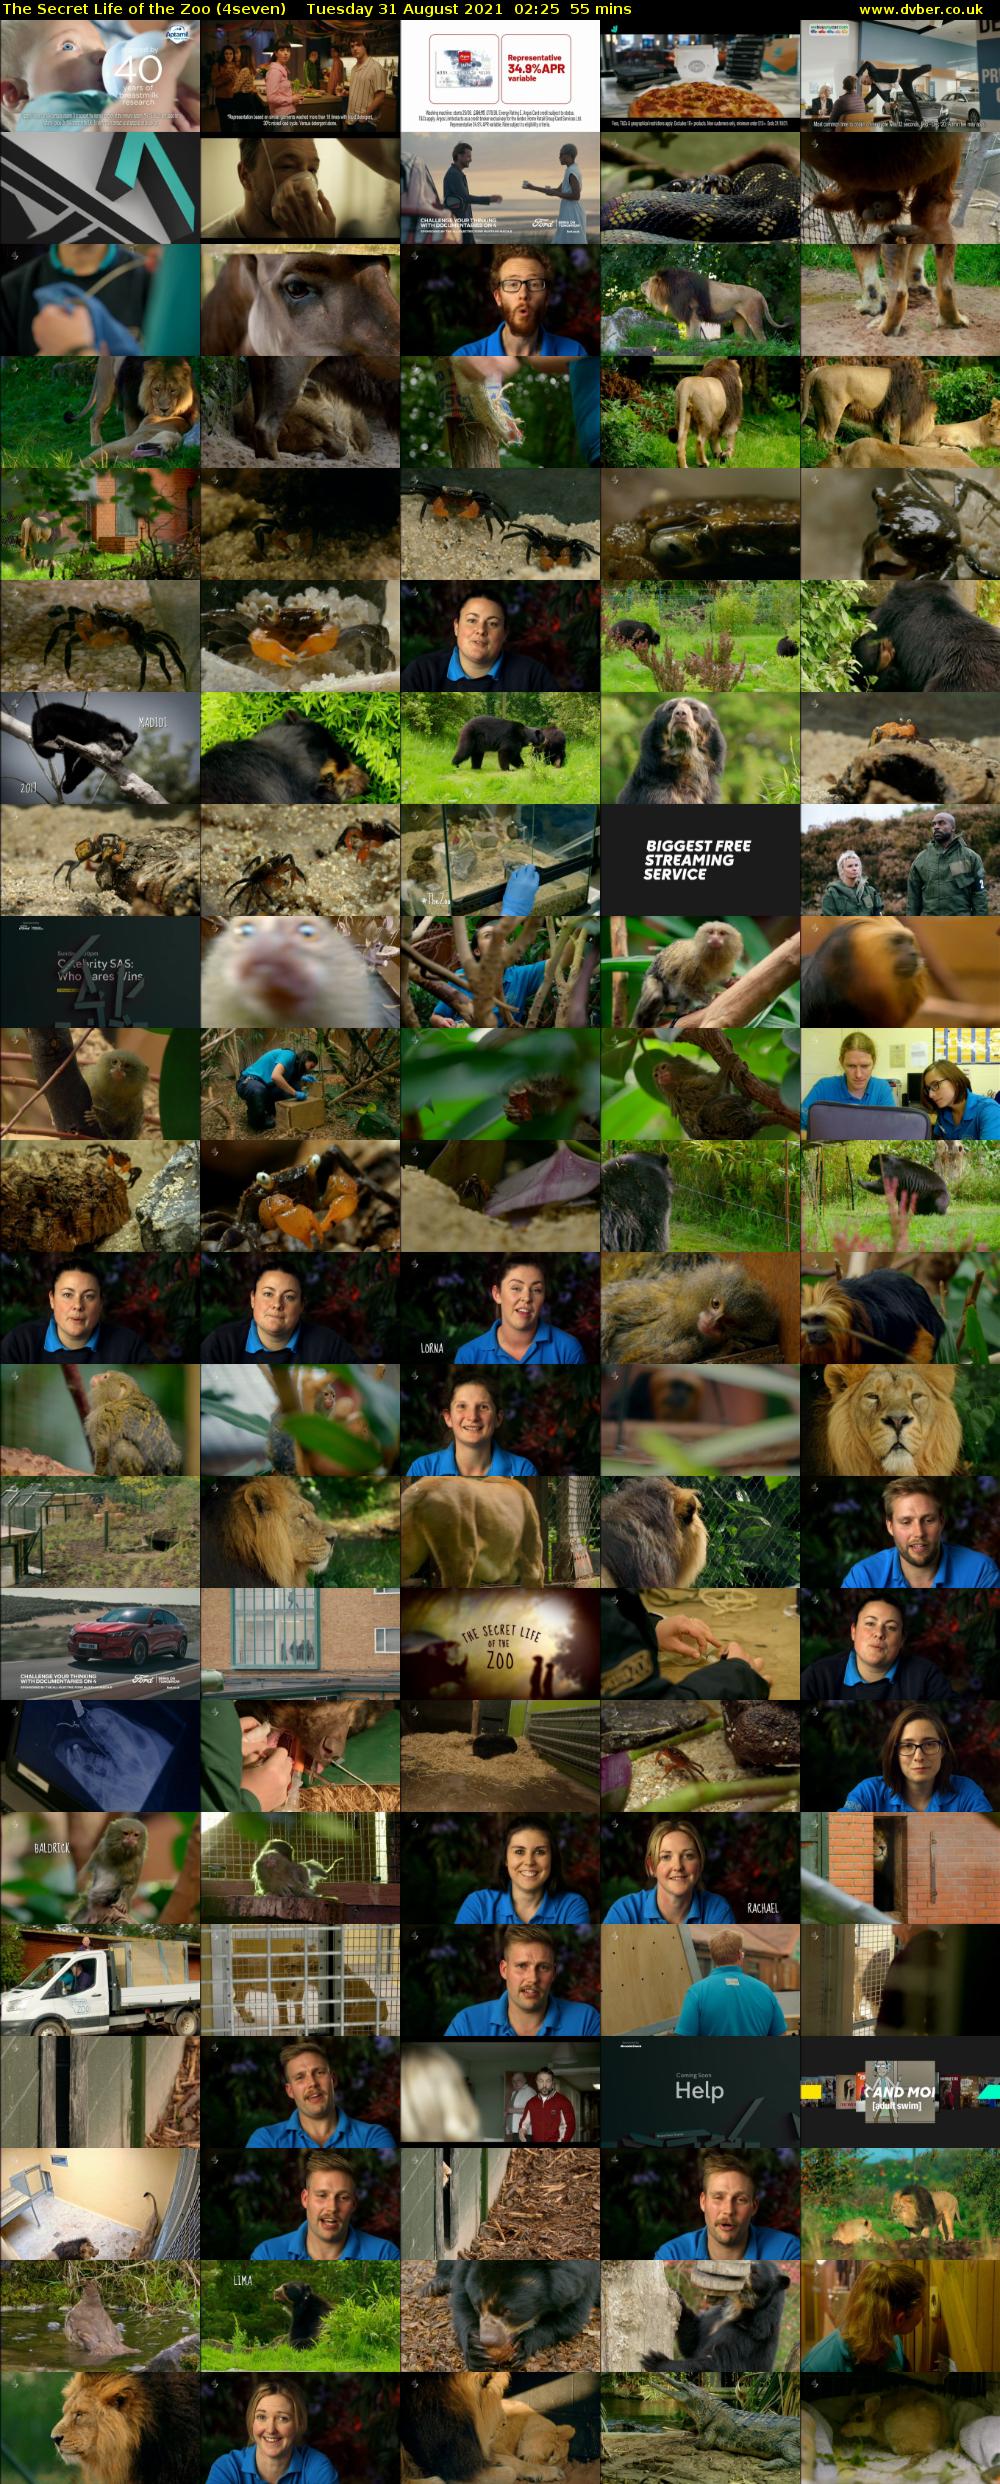 The Secret Life of the Zoo (4seven) Tuesday 31 August 2021 03:25 - 04:20